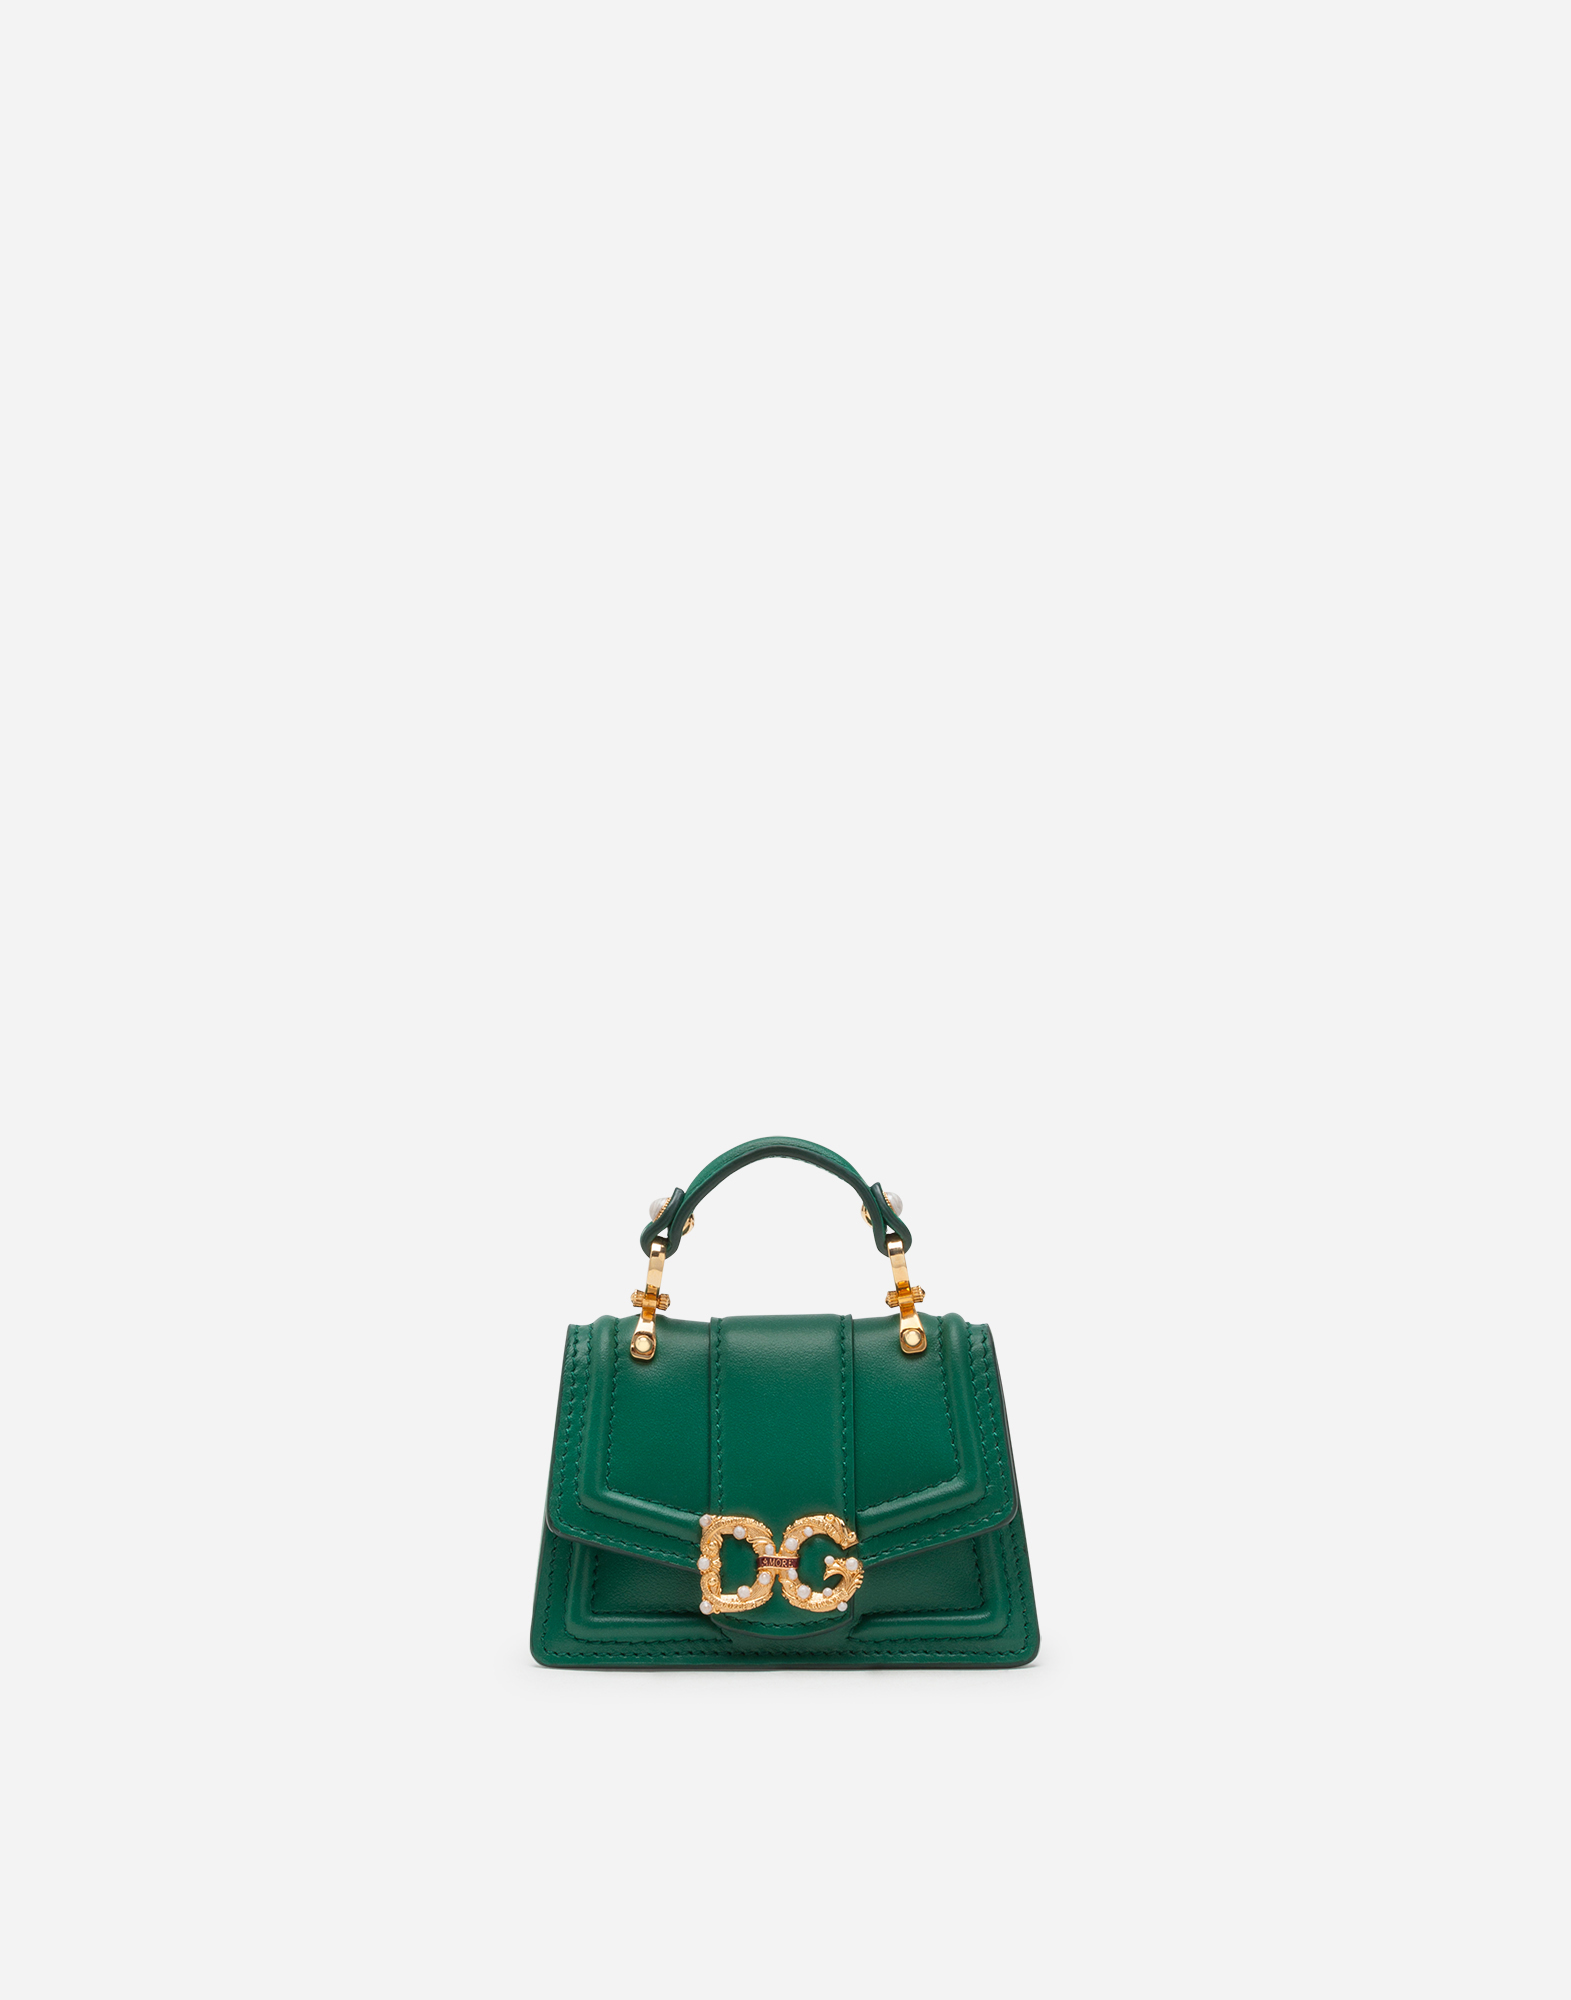 DG Amore micro bag in smooth calfskin